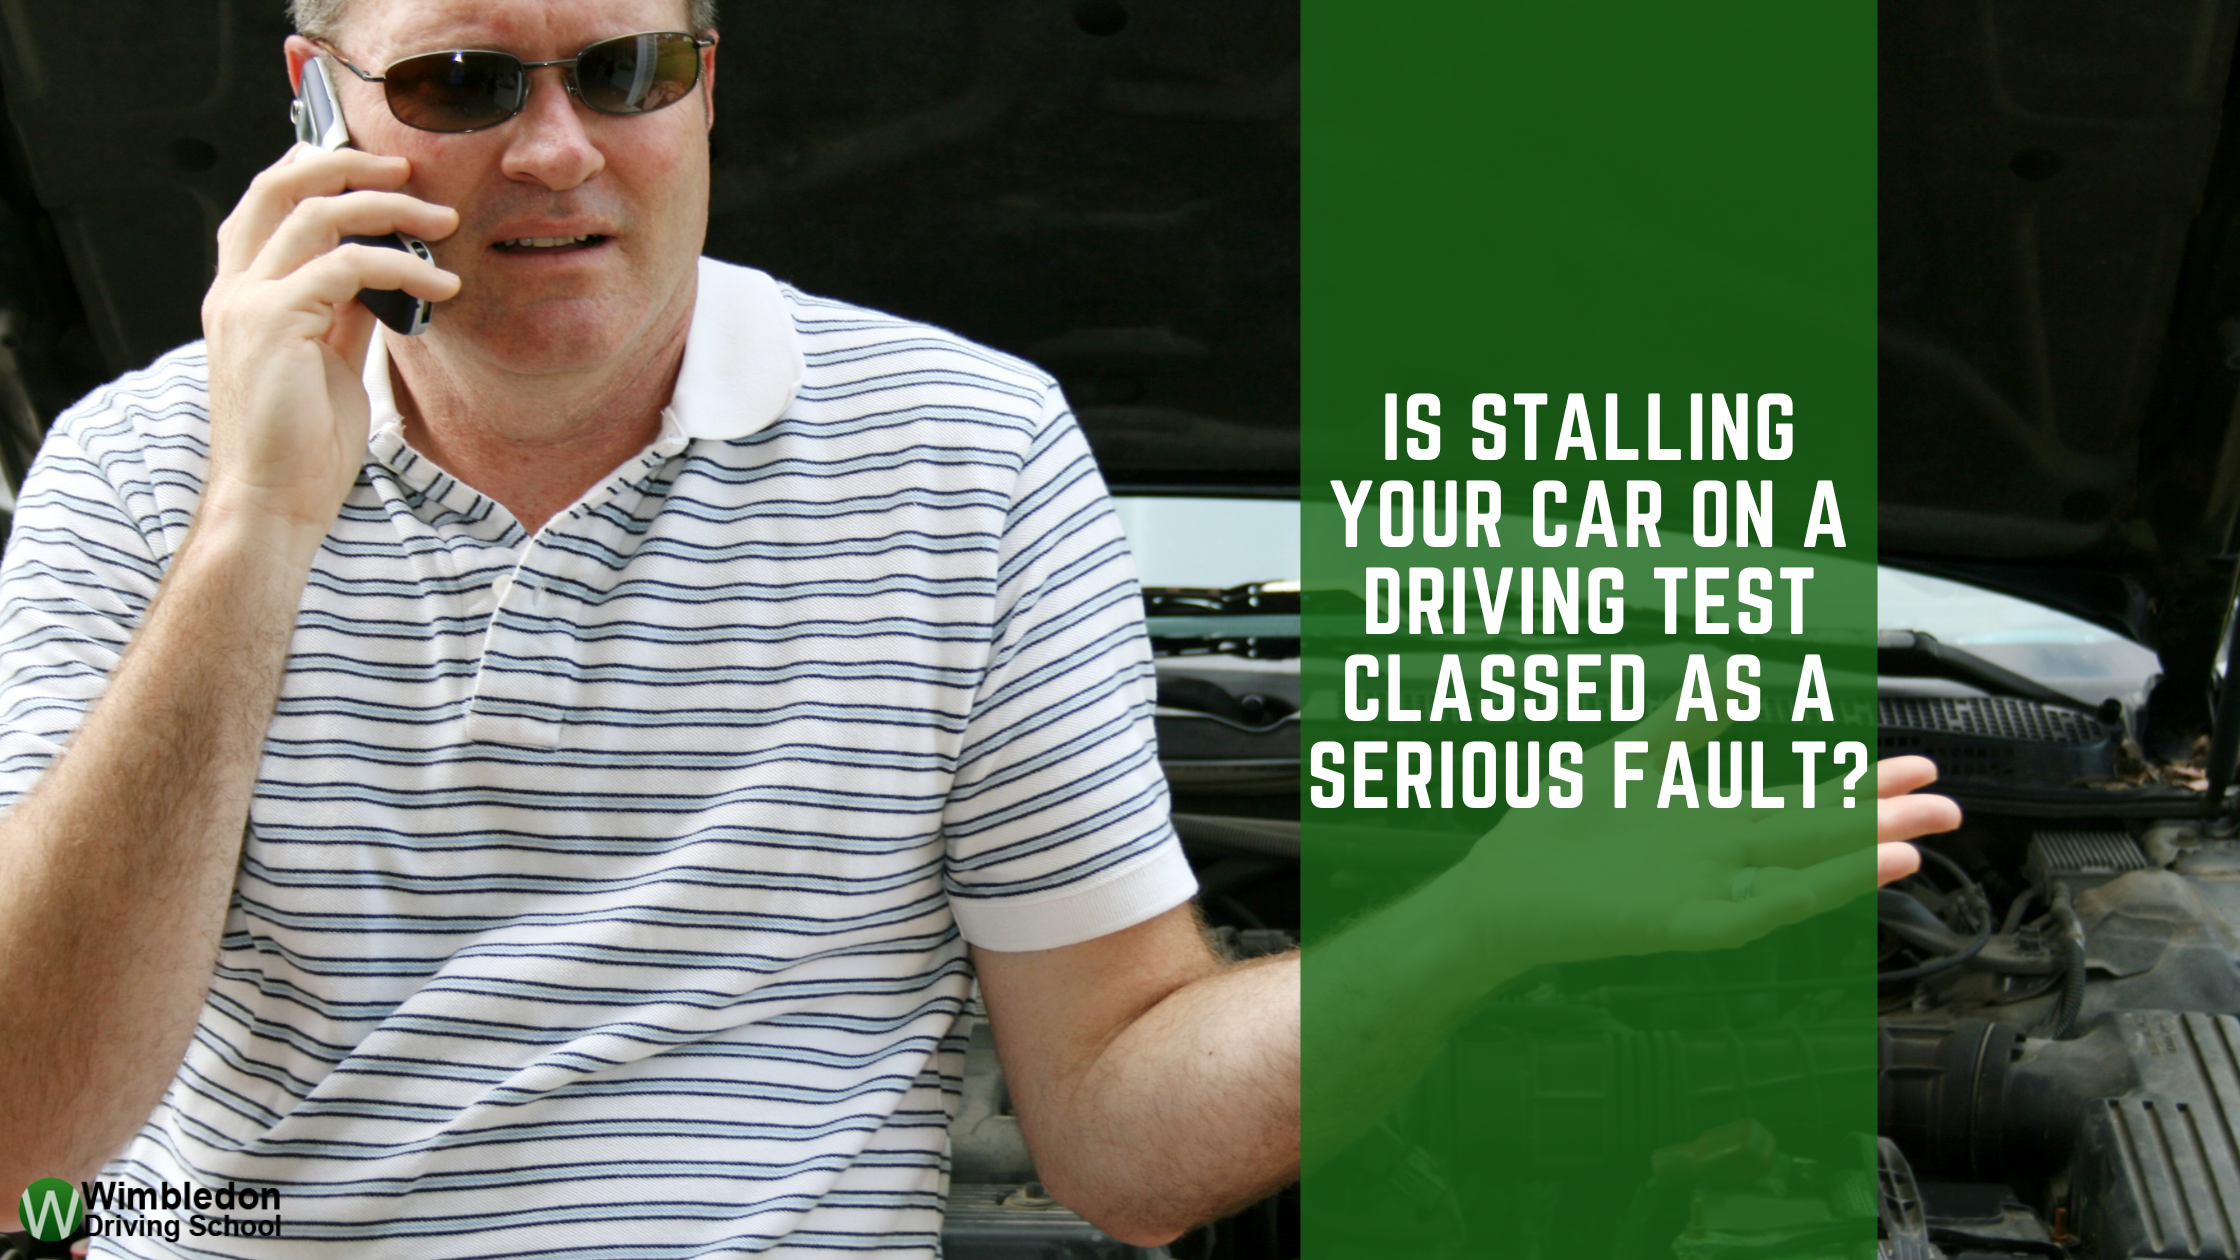 Is Stalling Your Car on a Driving Test Classed as a Serious Fault?